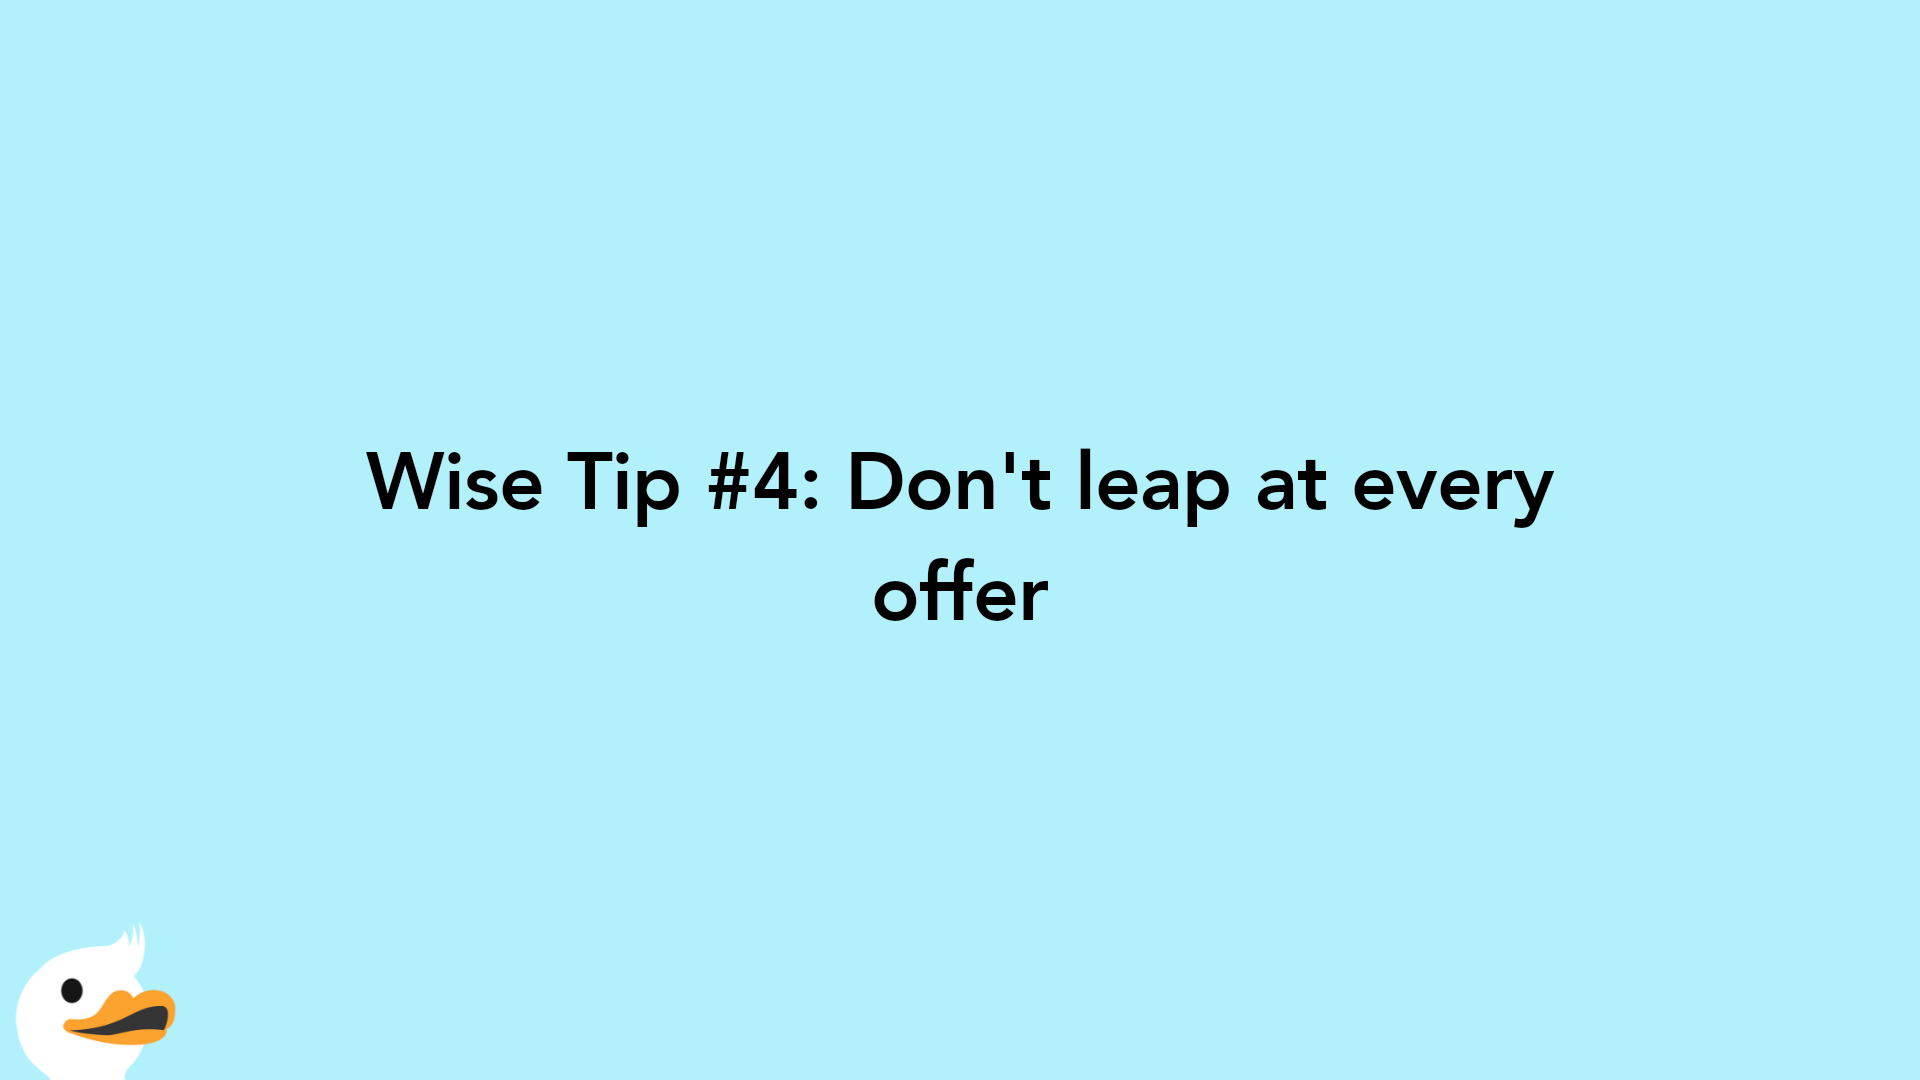 Wise Tip #4: Don't leap at every offer